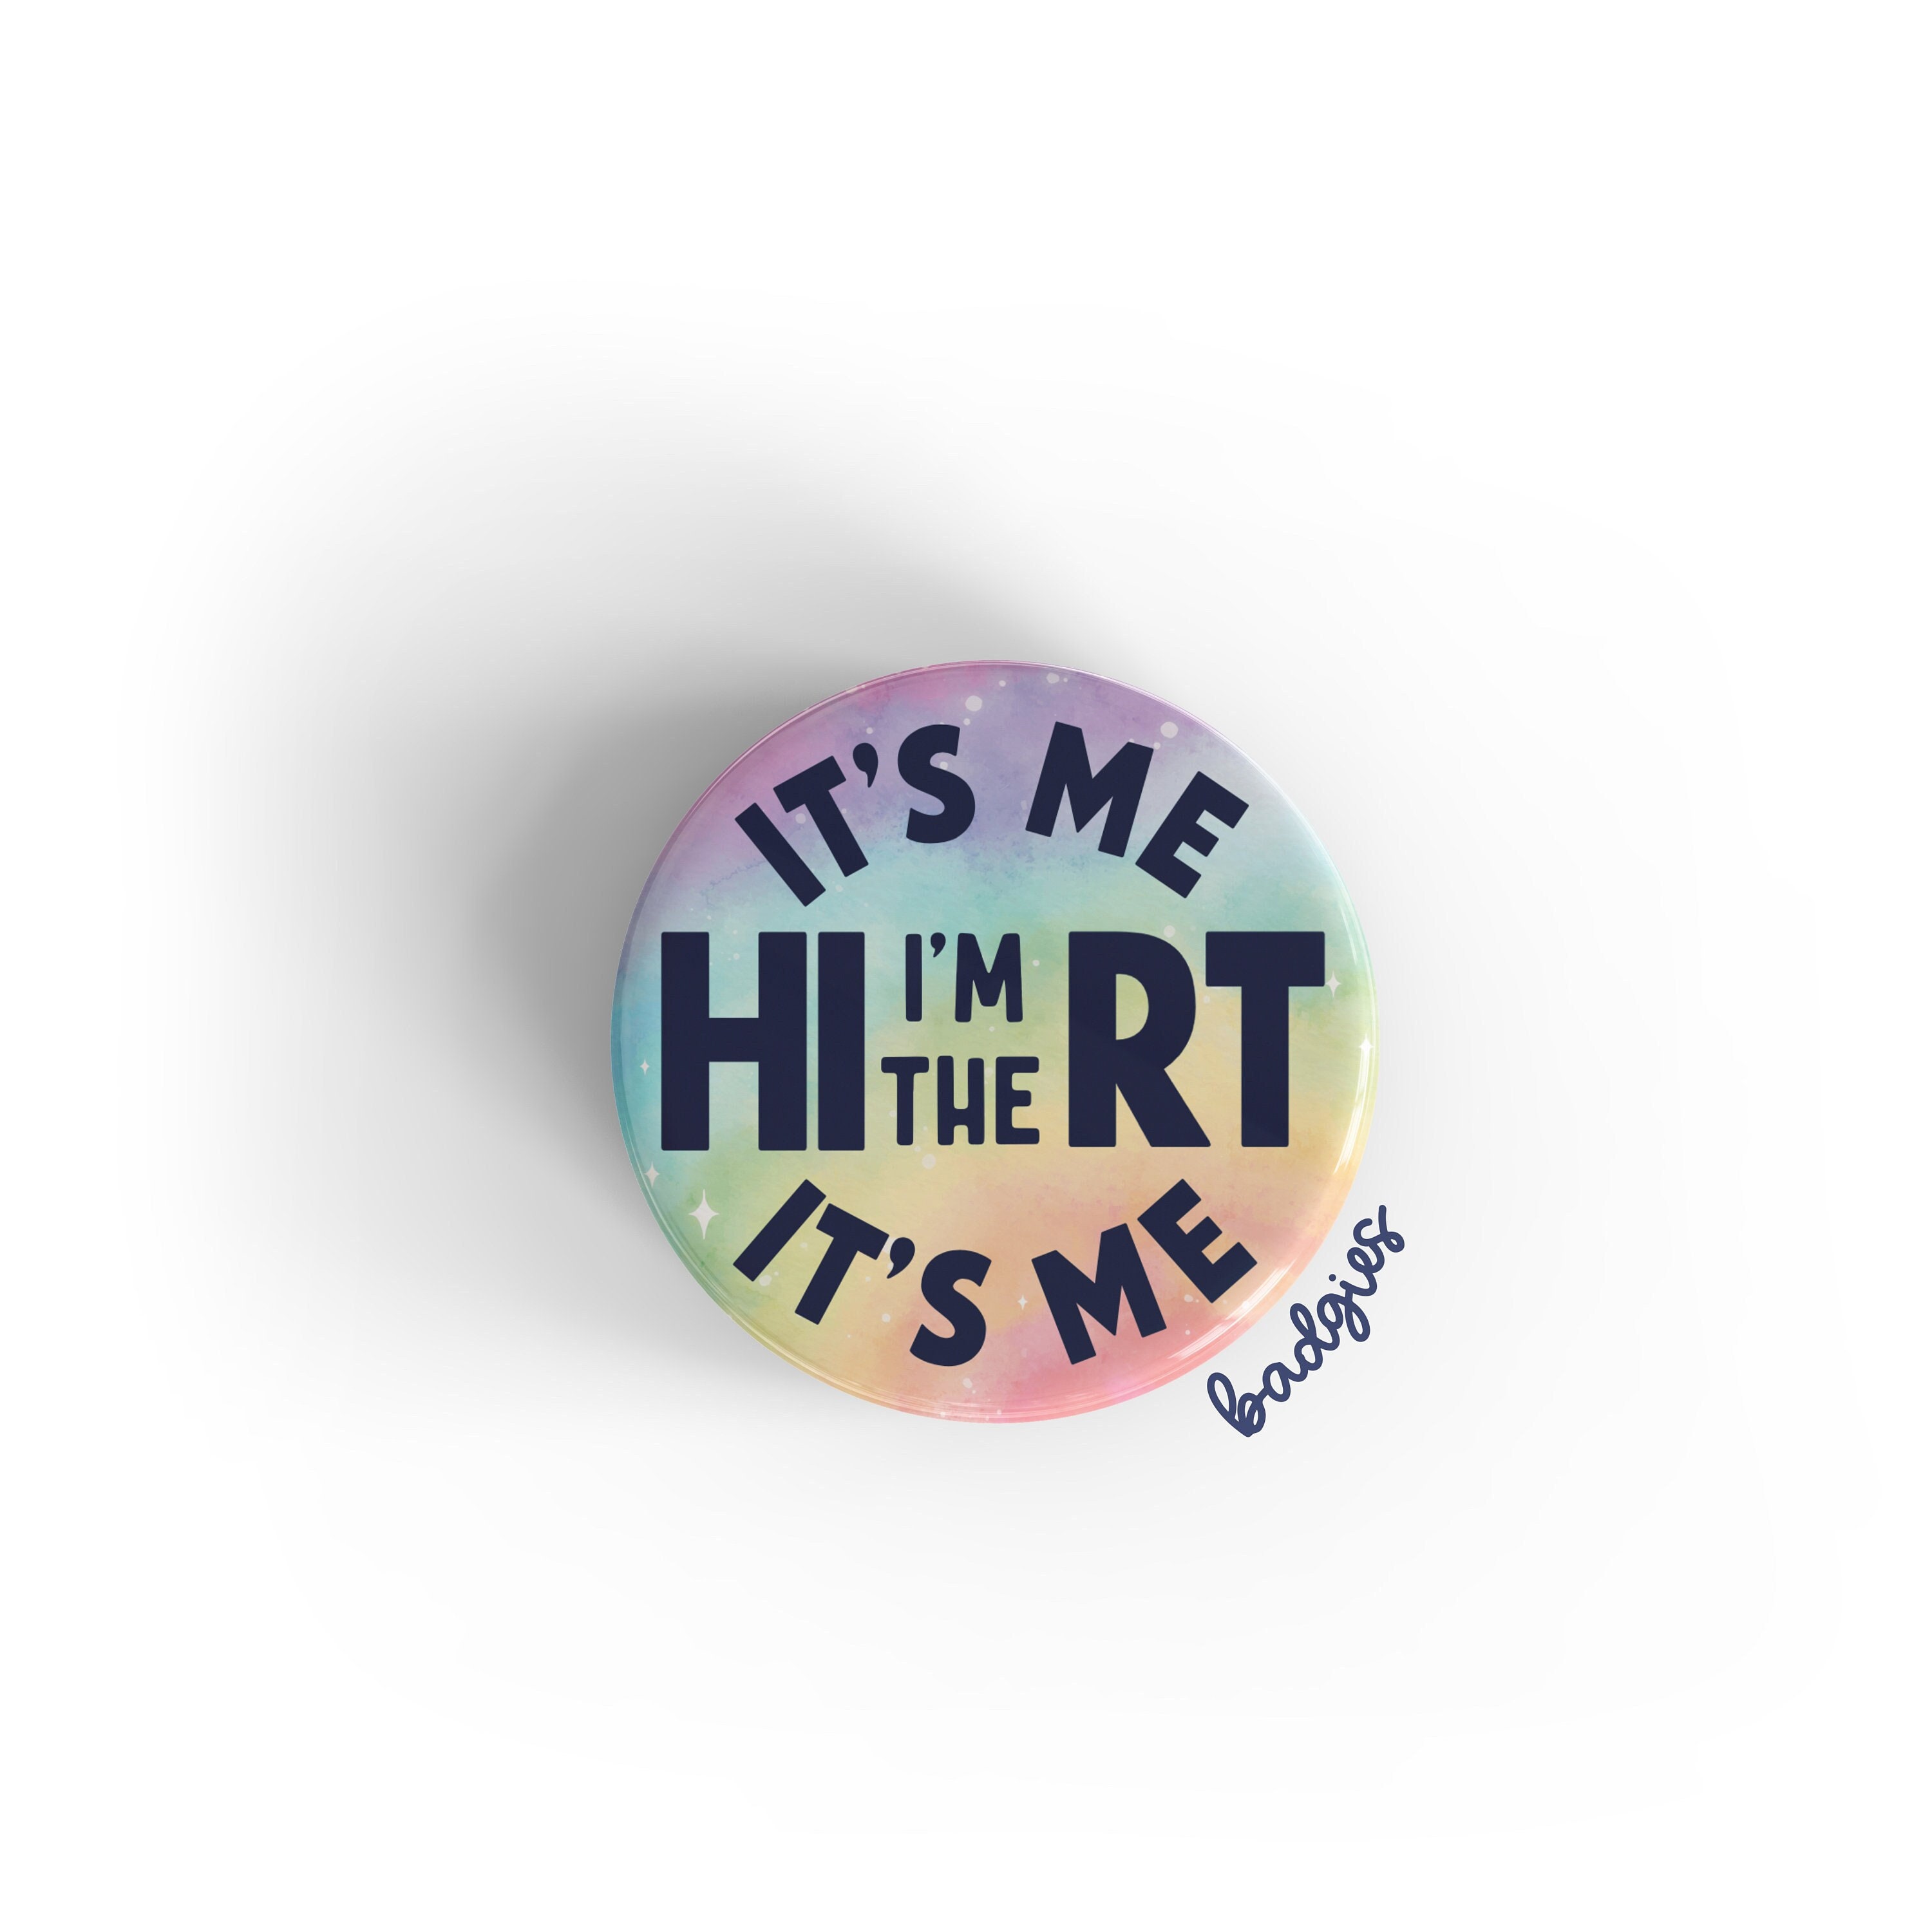 It's Me Hi I'm The RT It's Me badgie, respiratory therapist badge reel  cover, unique RT gift, rad tech, radiological technologist, Swift